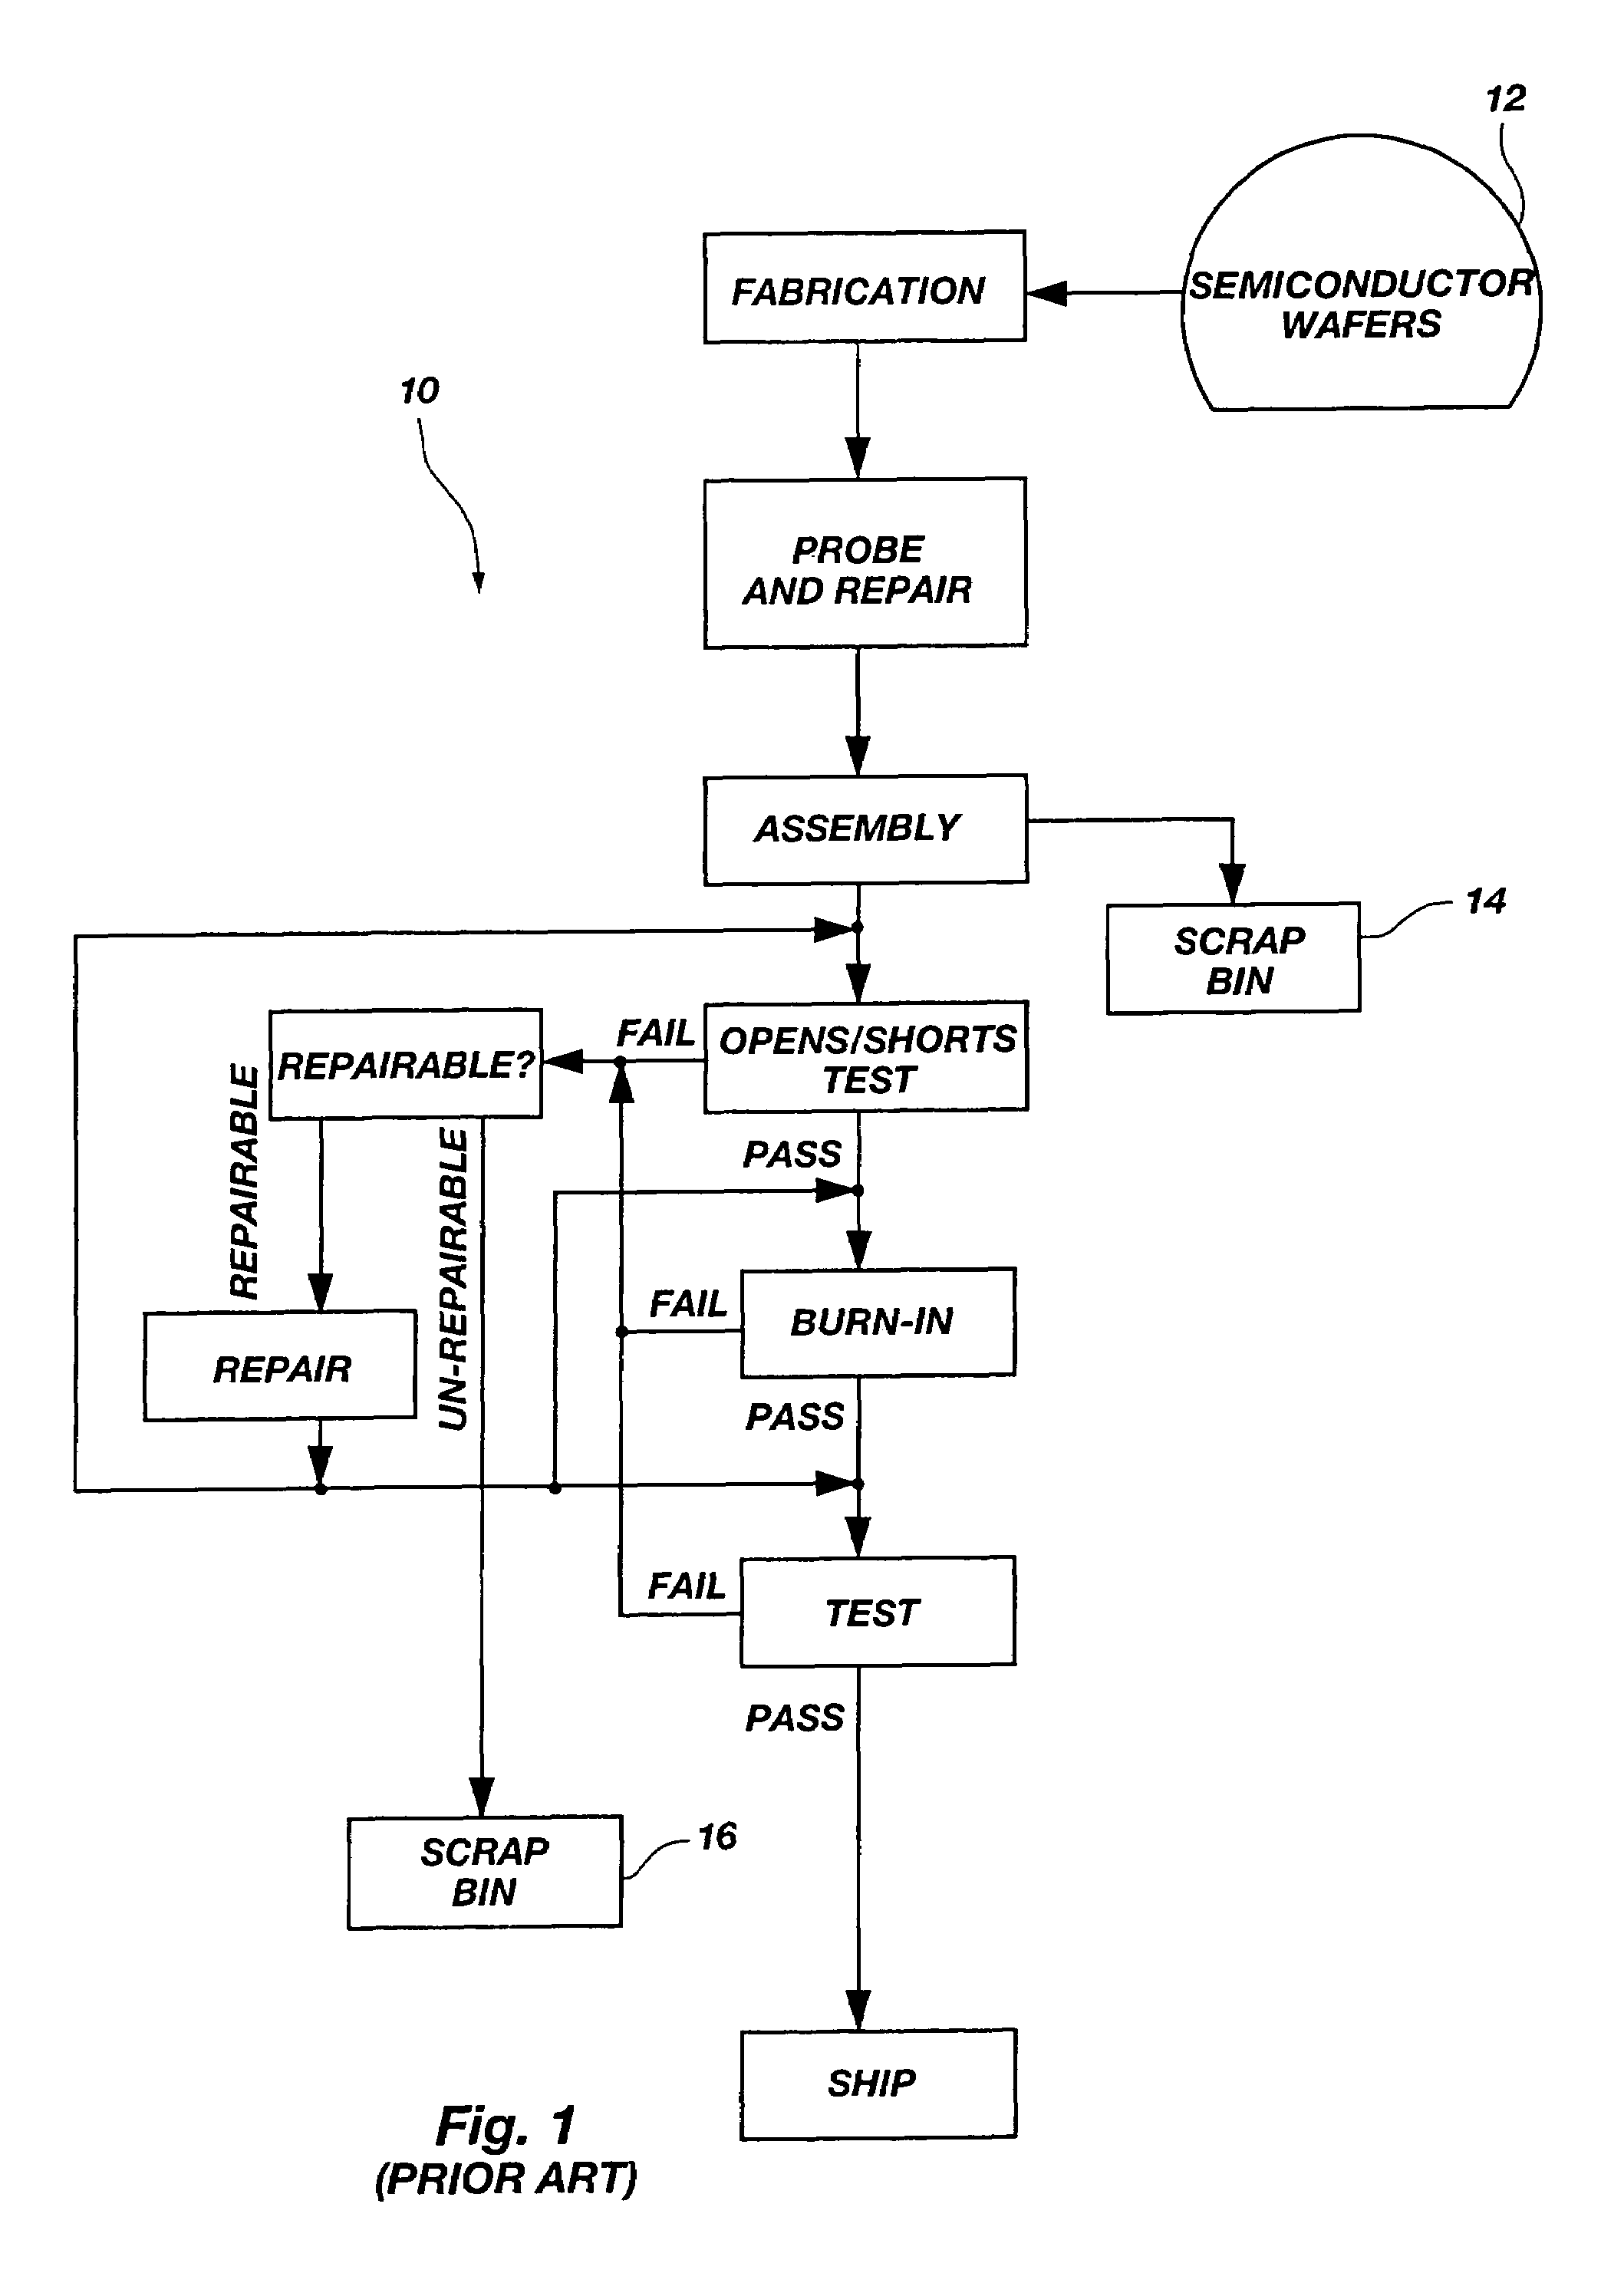 Method for using data regarding manufacturing procedures integrated circuits (ICS) have undergone, such as repairs, to select procedures the ICS will undergo, such as additional repairs